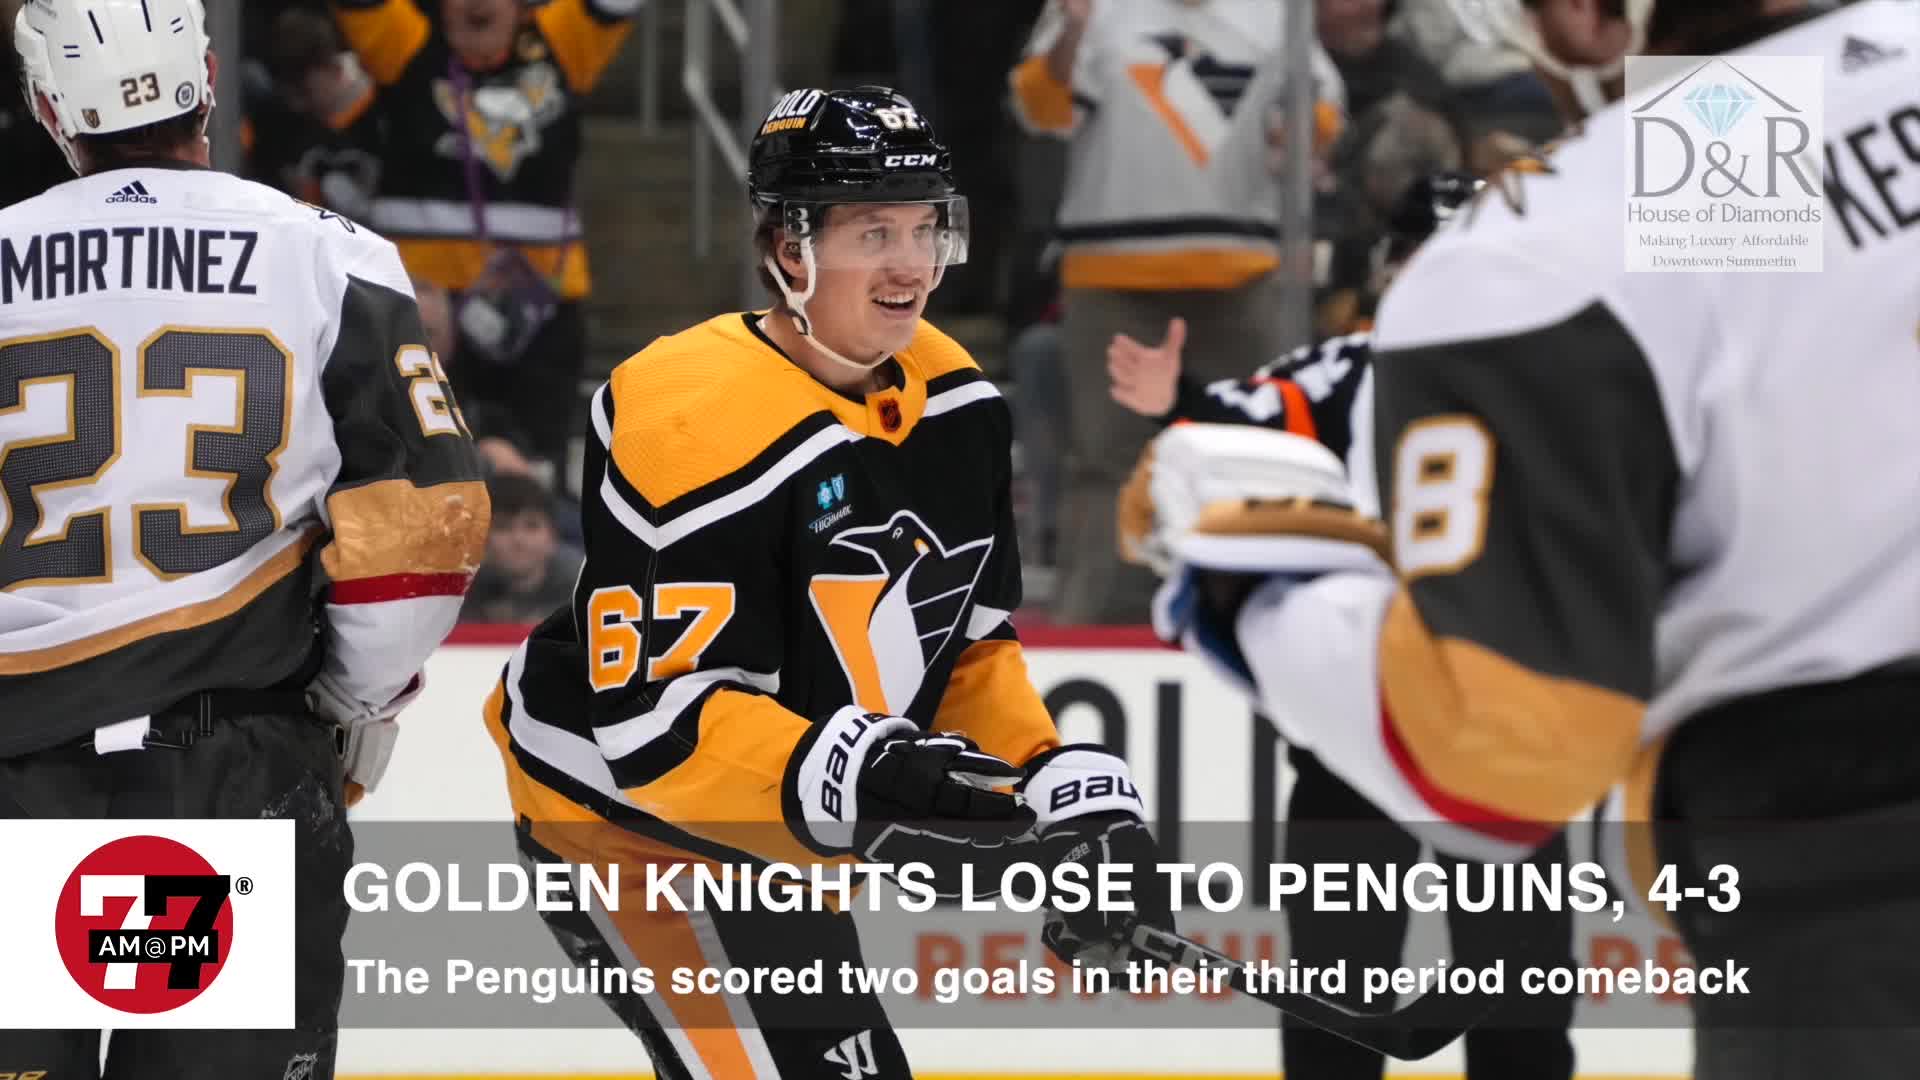 Golden Knights lose to Penguins 4-3